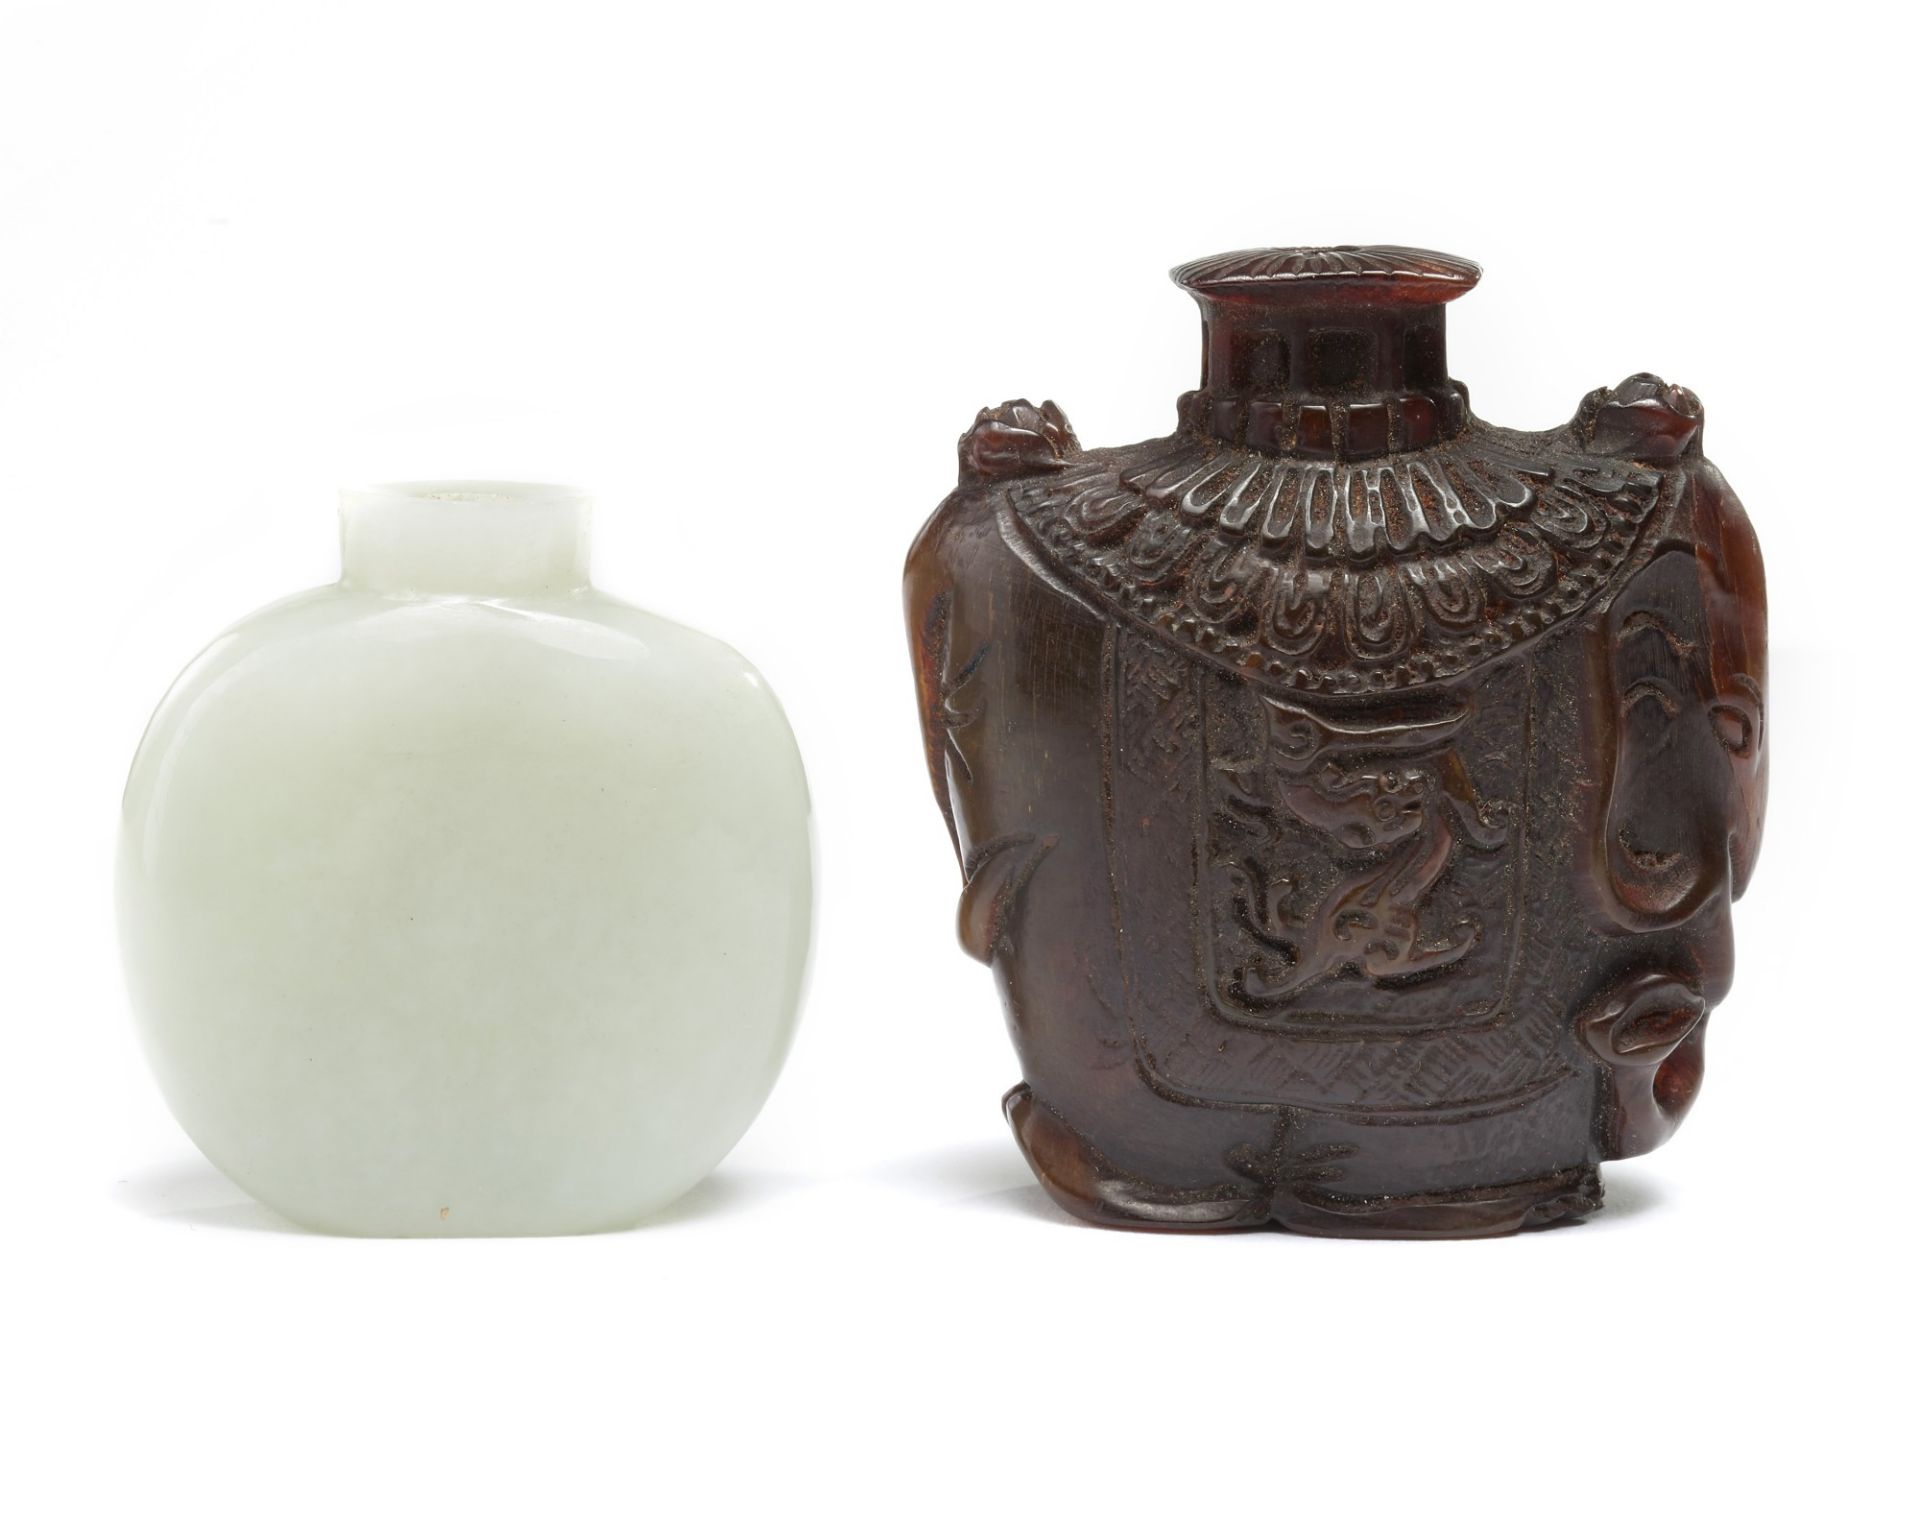 A Chinese pale celadon jade snuff bottle and a buffalo horn snuff bottle